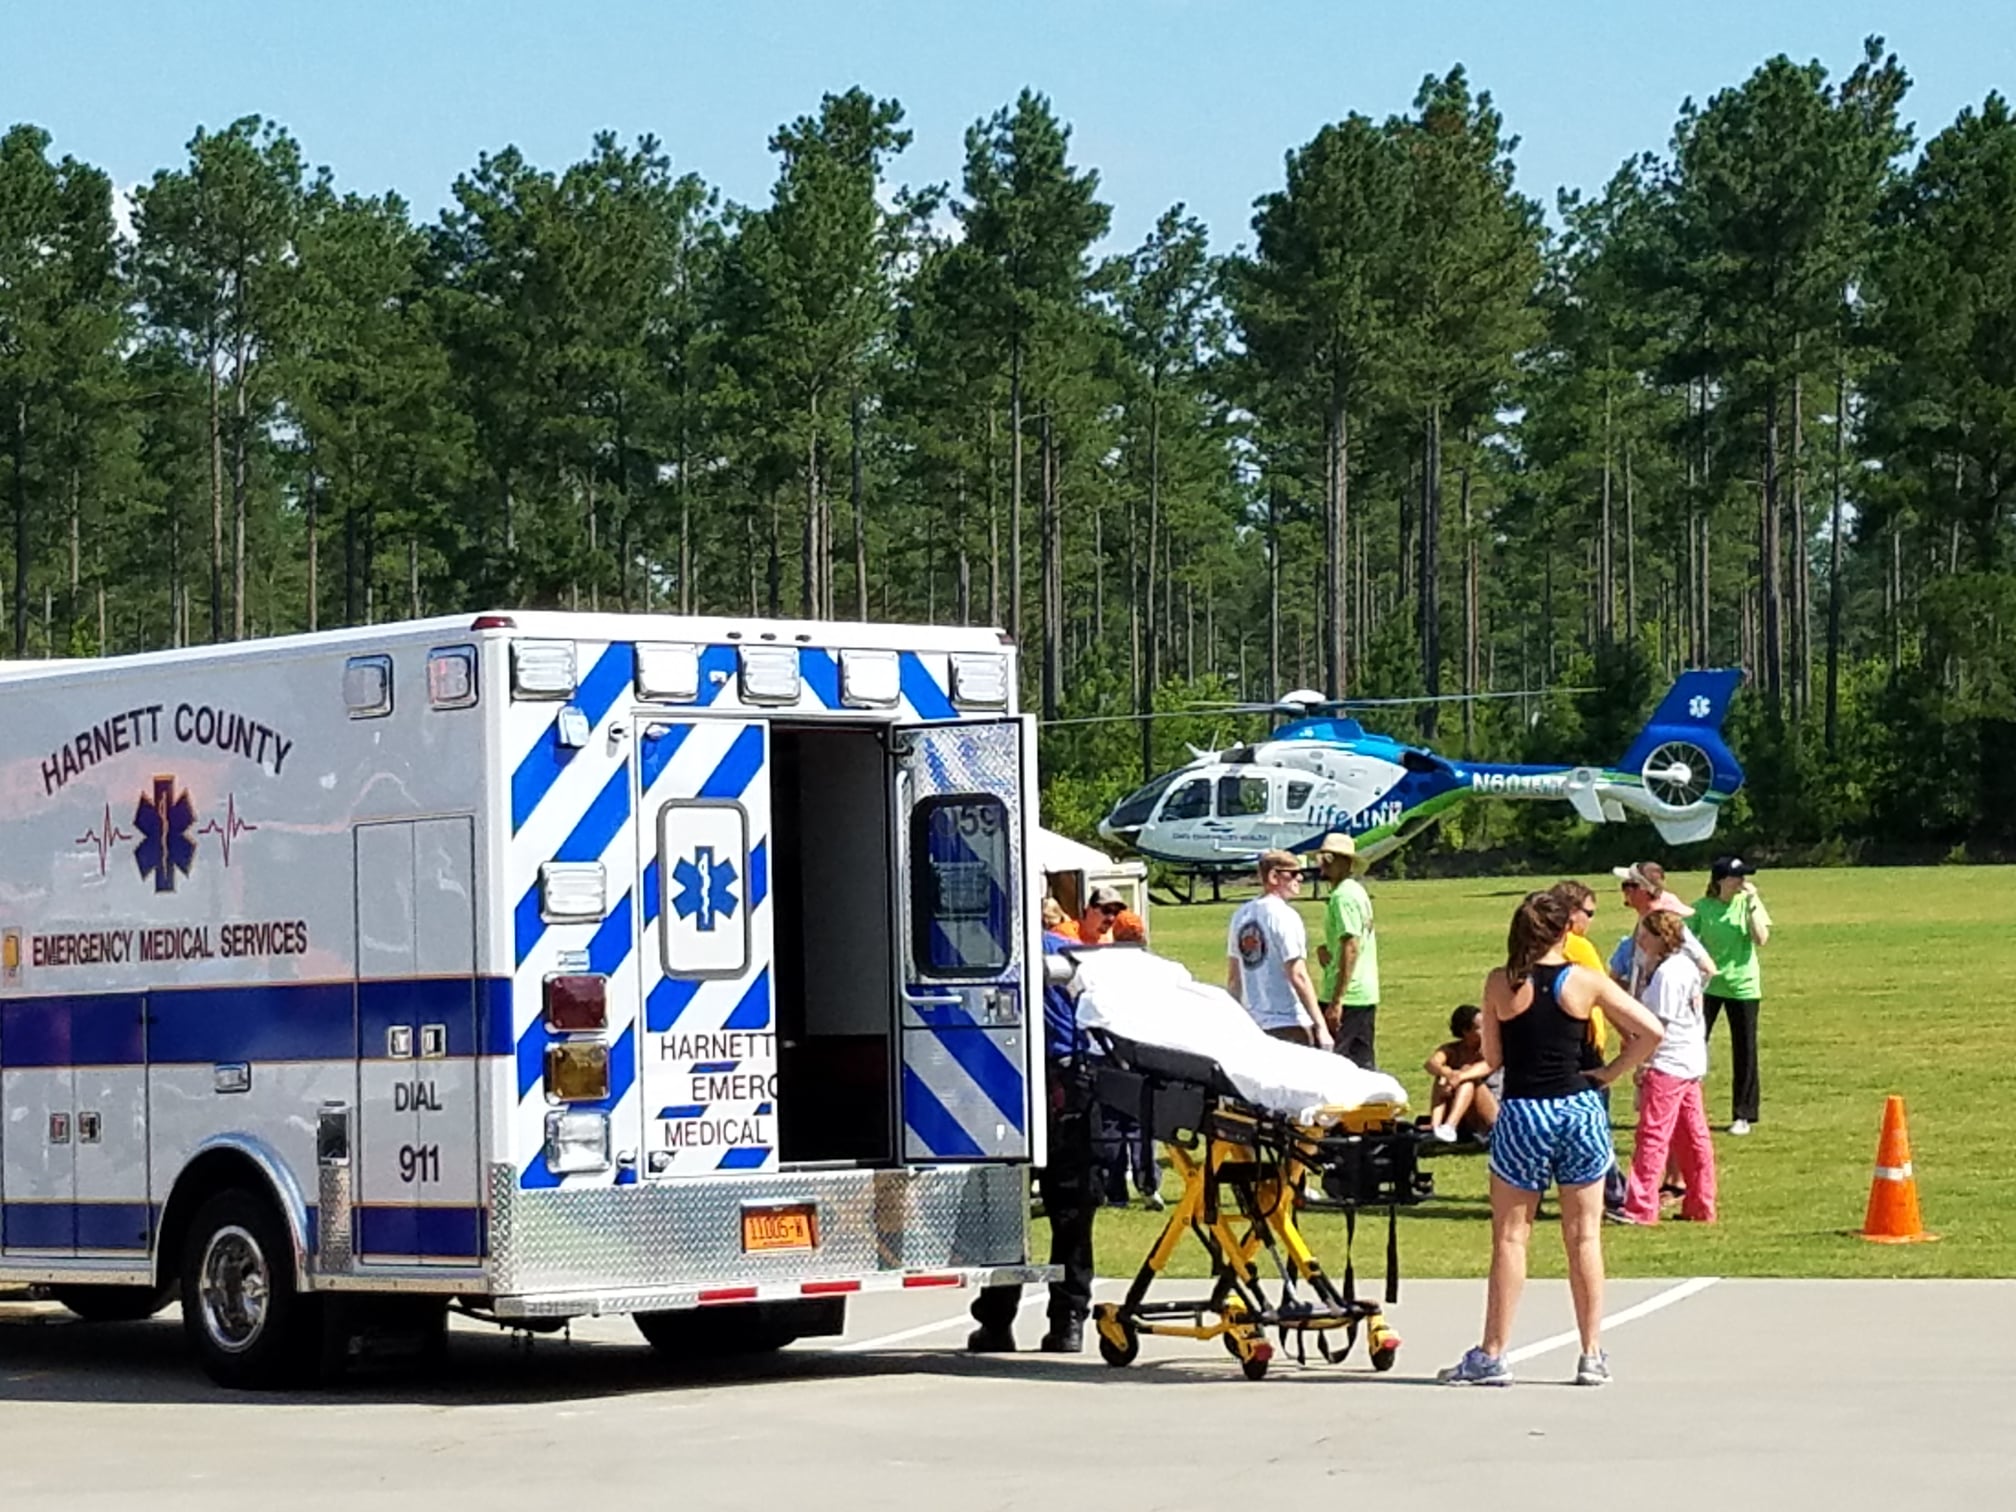 We are hiring! Come be part of our EMS Team in Harnett County.